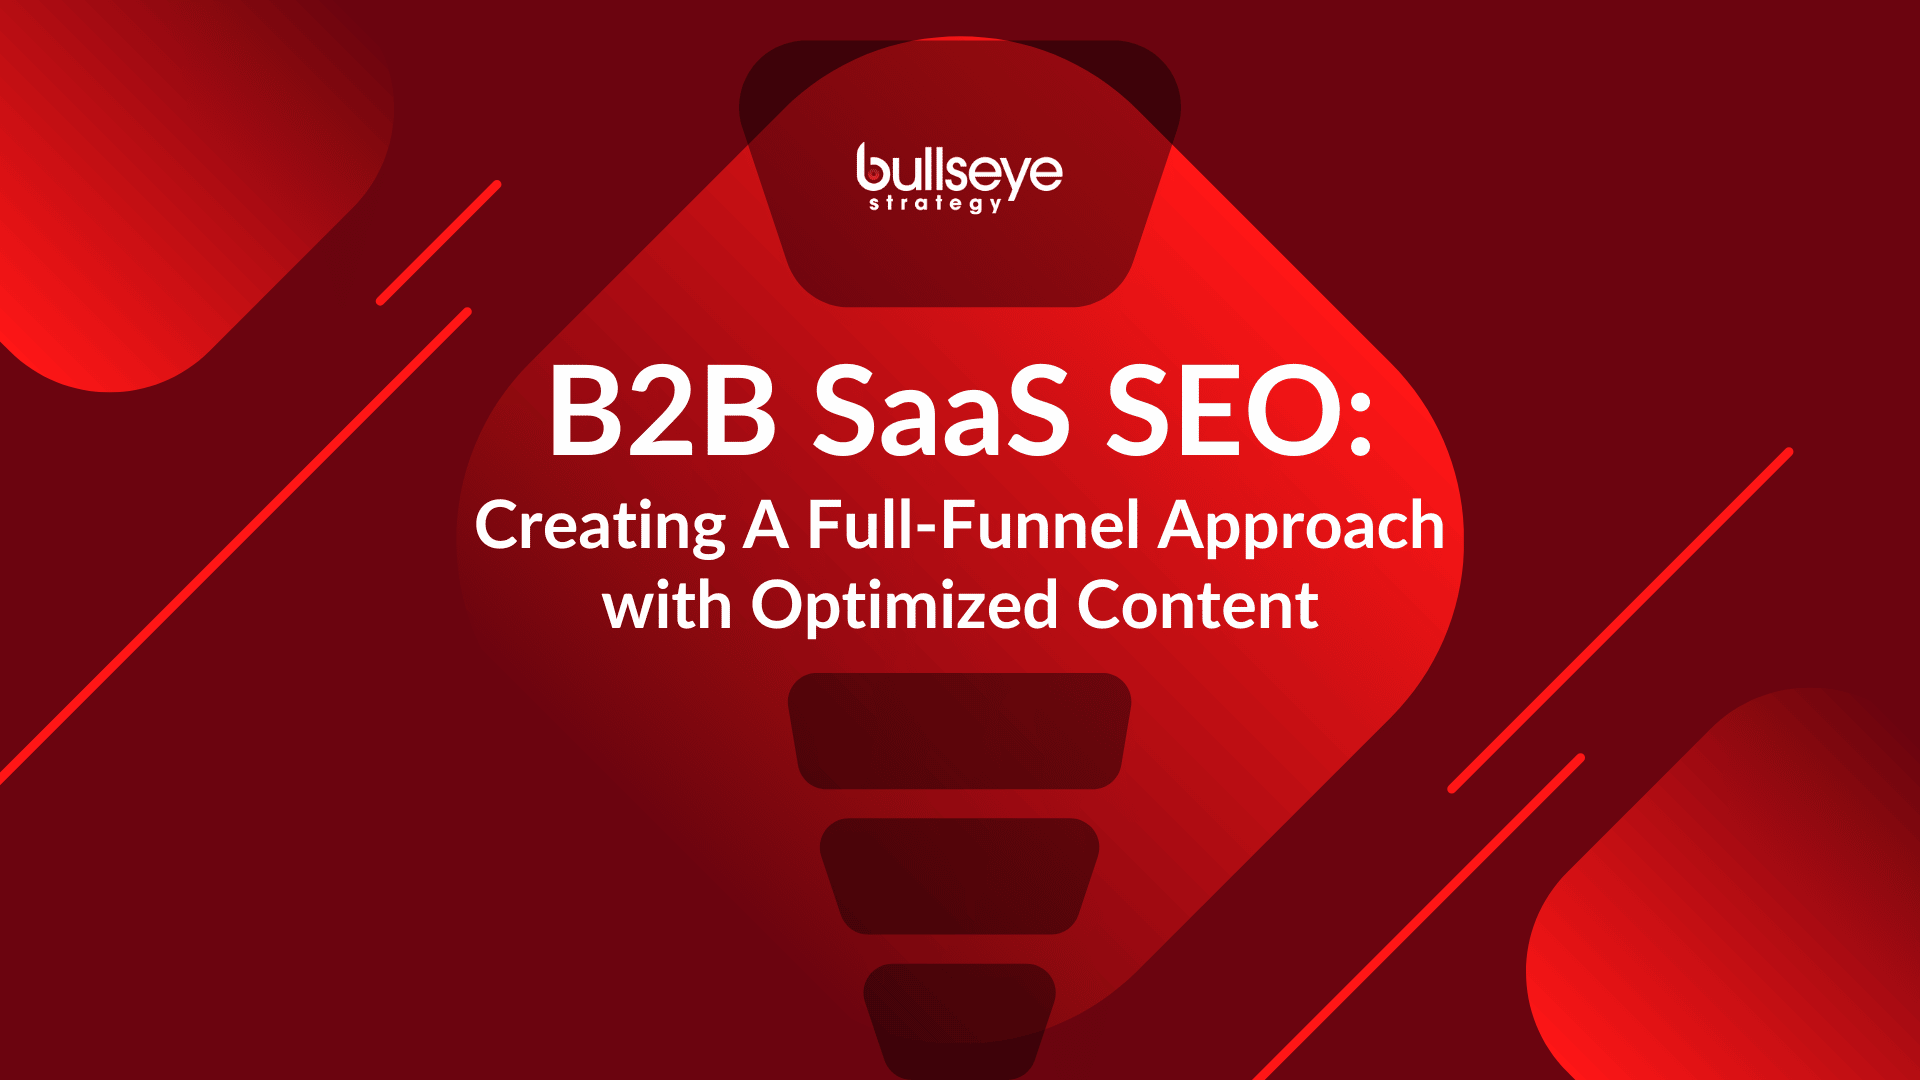 Begin your B2B SaaS SEO strategy with a full website SEO Audit.